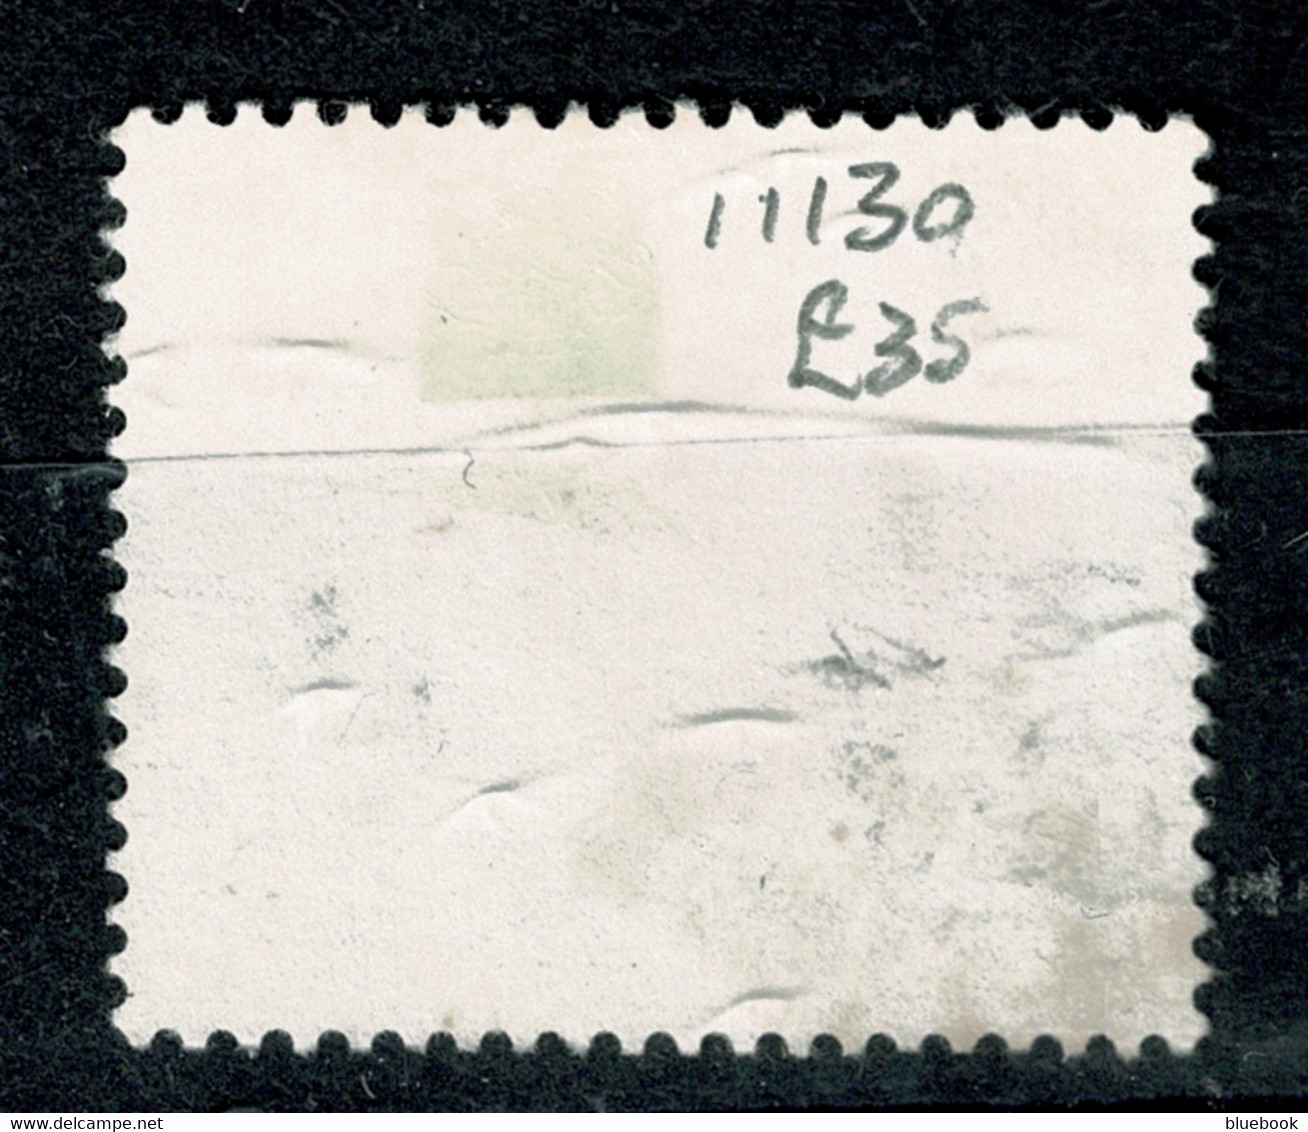 Ref 1573 - 1990 Israel - 1s With Phospor Band - Used Cat £35+ - Used Stamps (without Tabs)